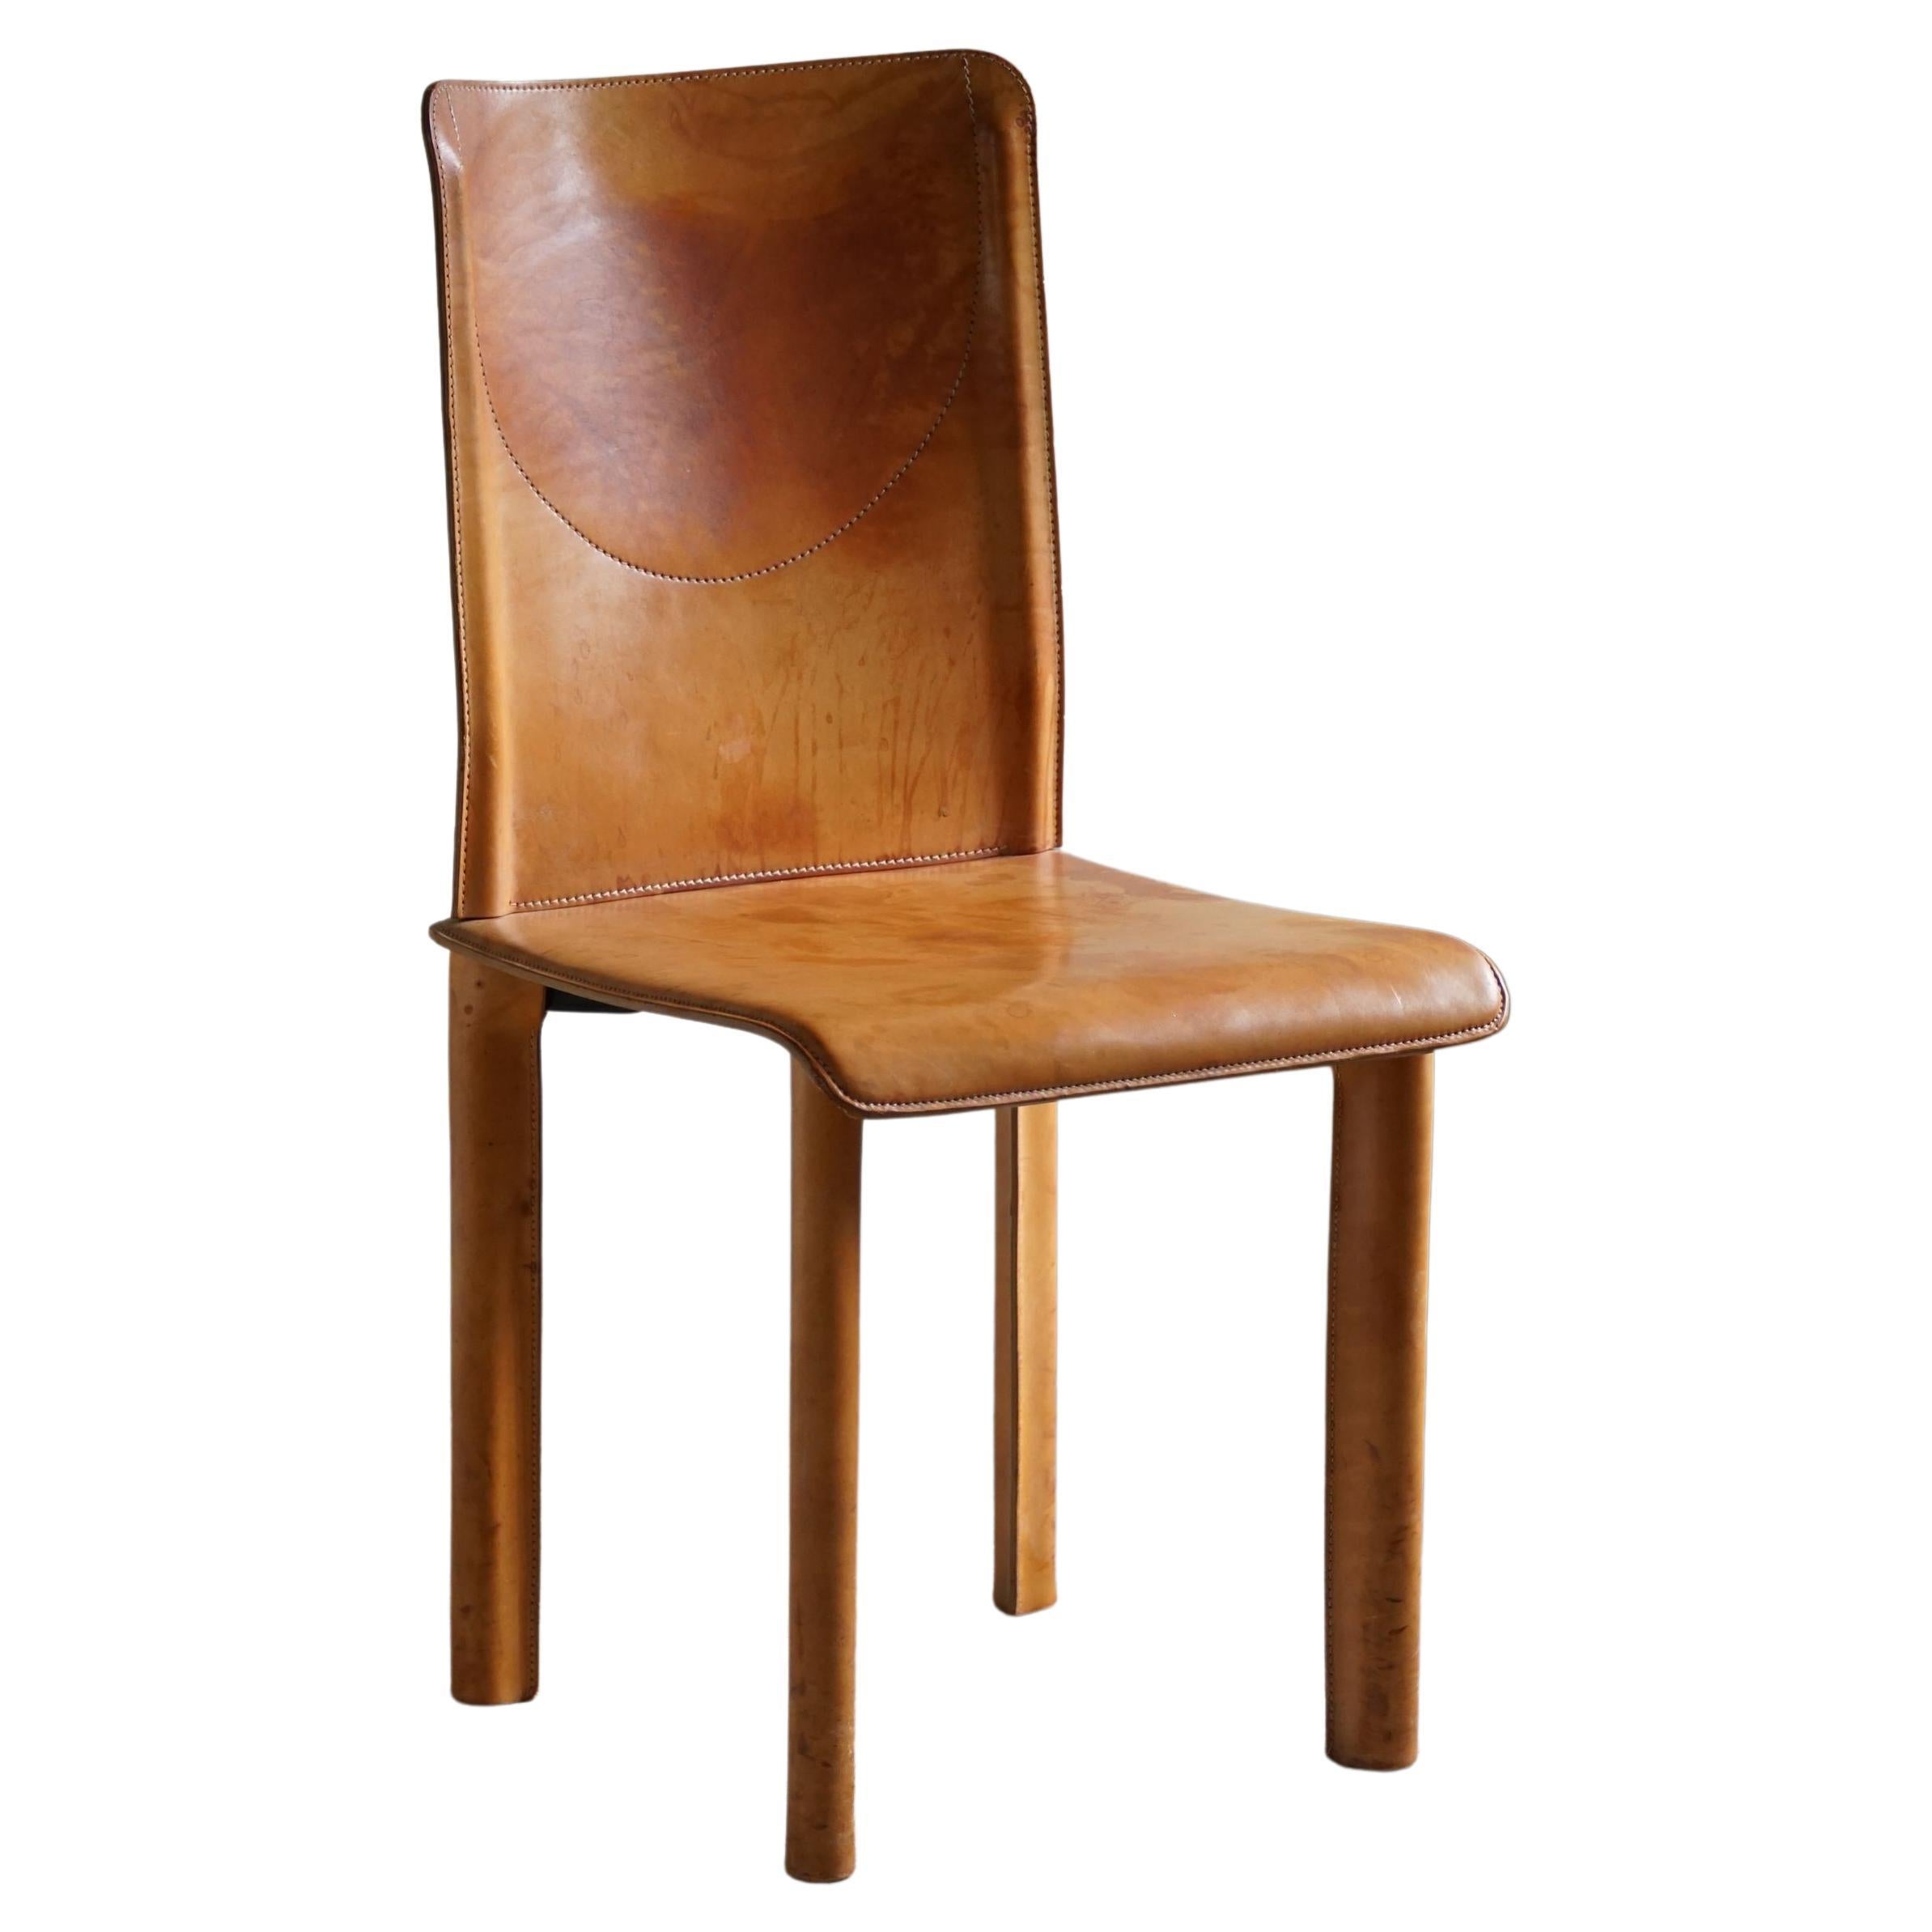 Italian Modern, Dining Chair in Patinated Cognac Leather, Mario Bellini, 1970s